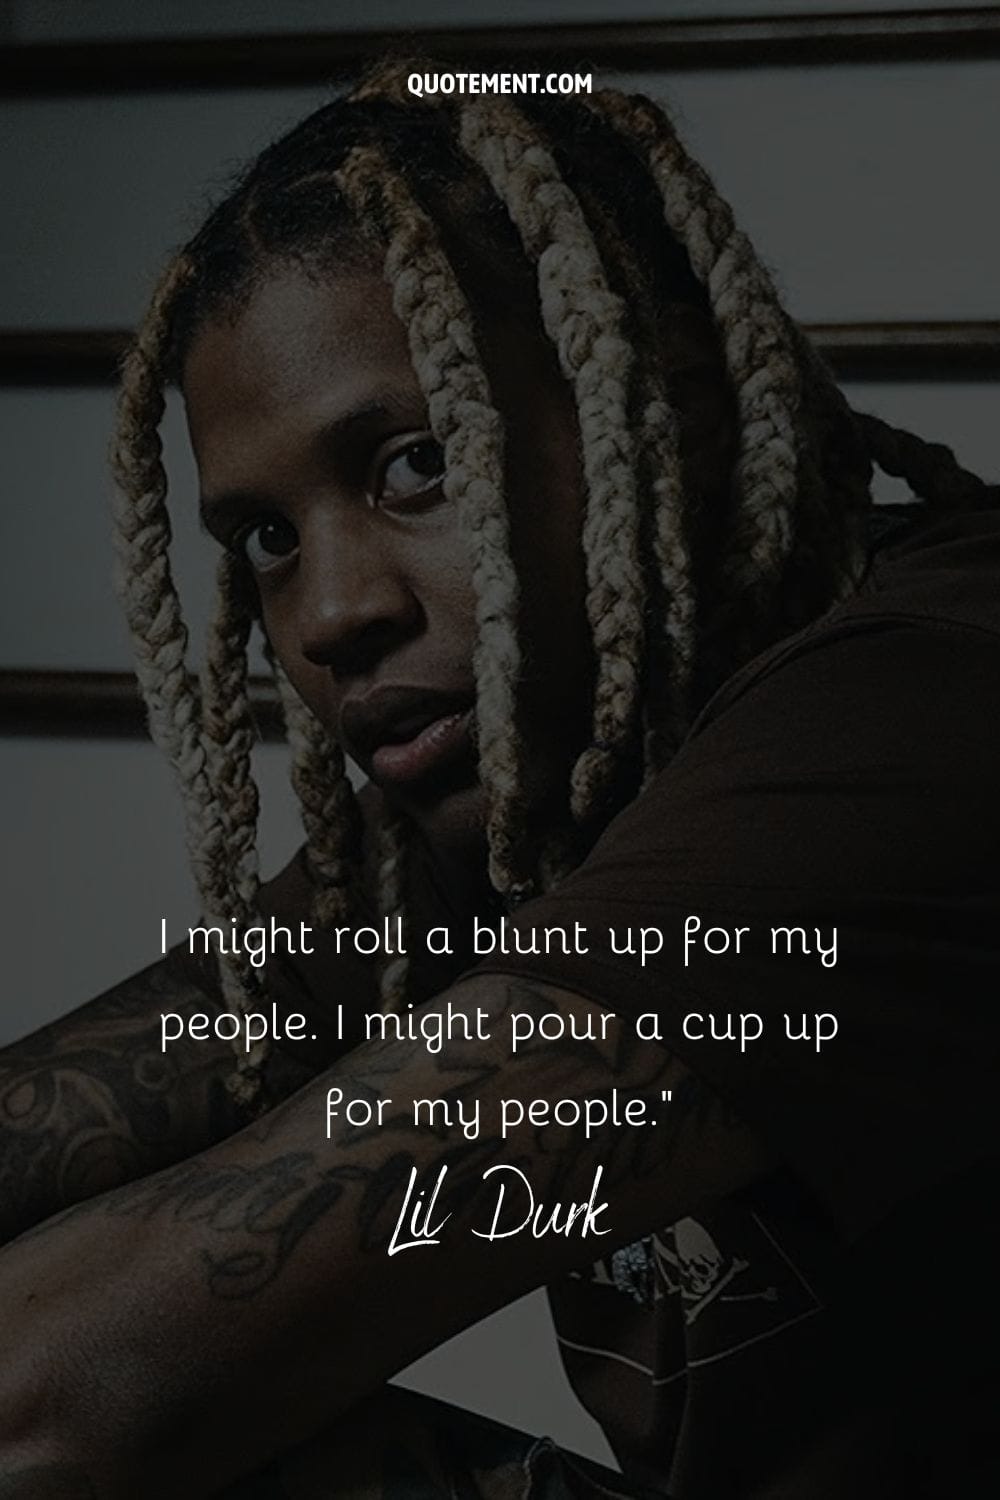 Lil Durk's laid-back charm in a brown tee, looking at the lens